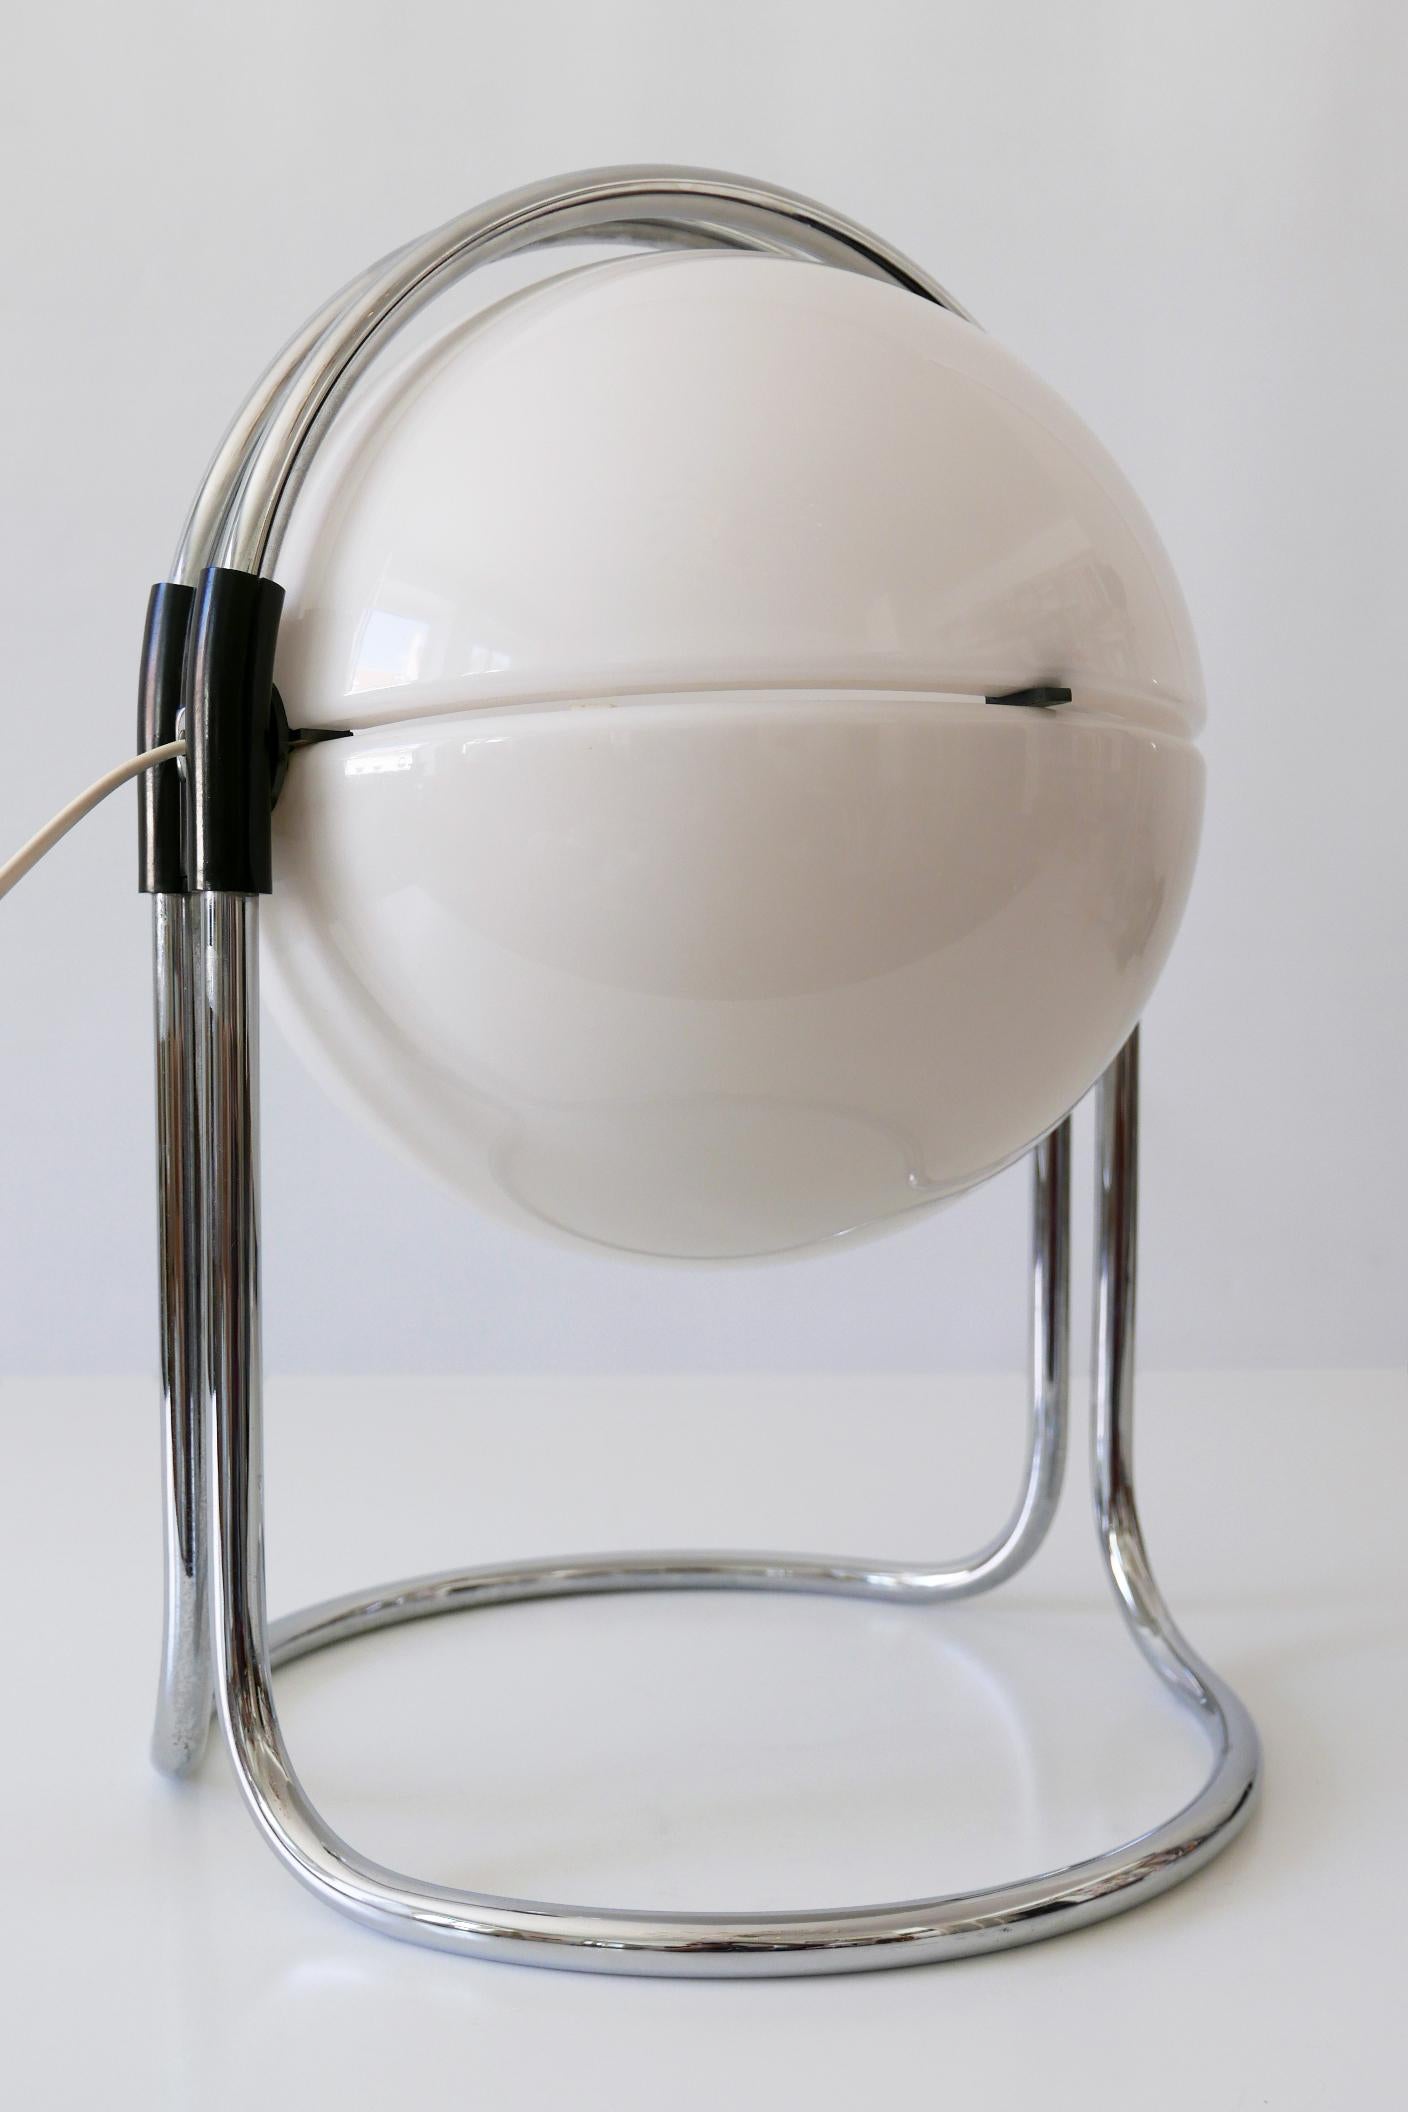 Exceptional and Large Table Lamp by Andre Ricard for Metalarte Spain 1967 In Good Condition For Sale In Munich, DE